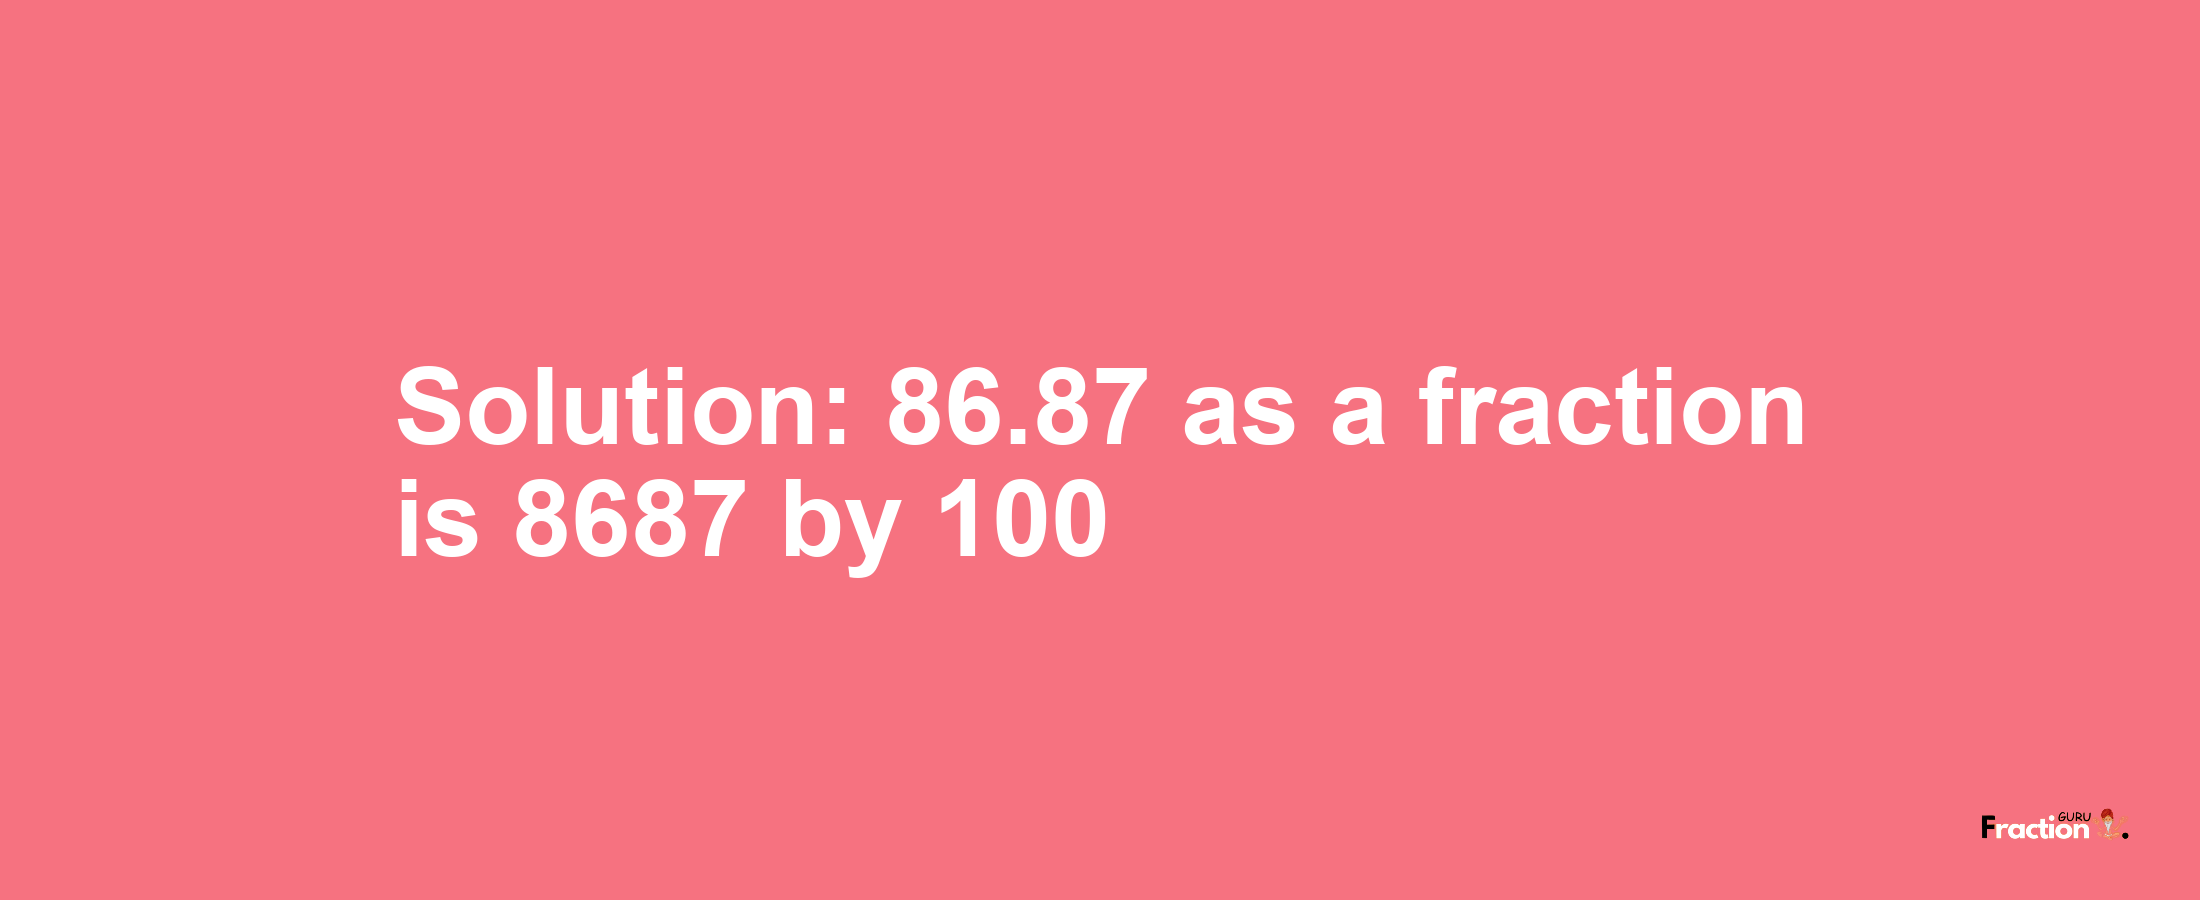 Solution:86.87 as a fraction is 8687/100